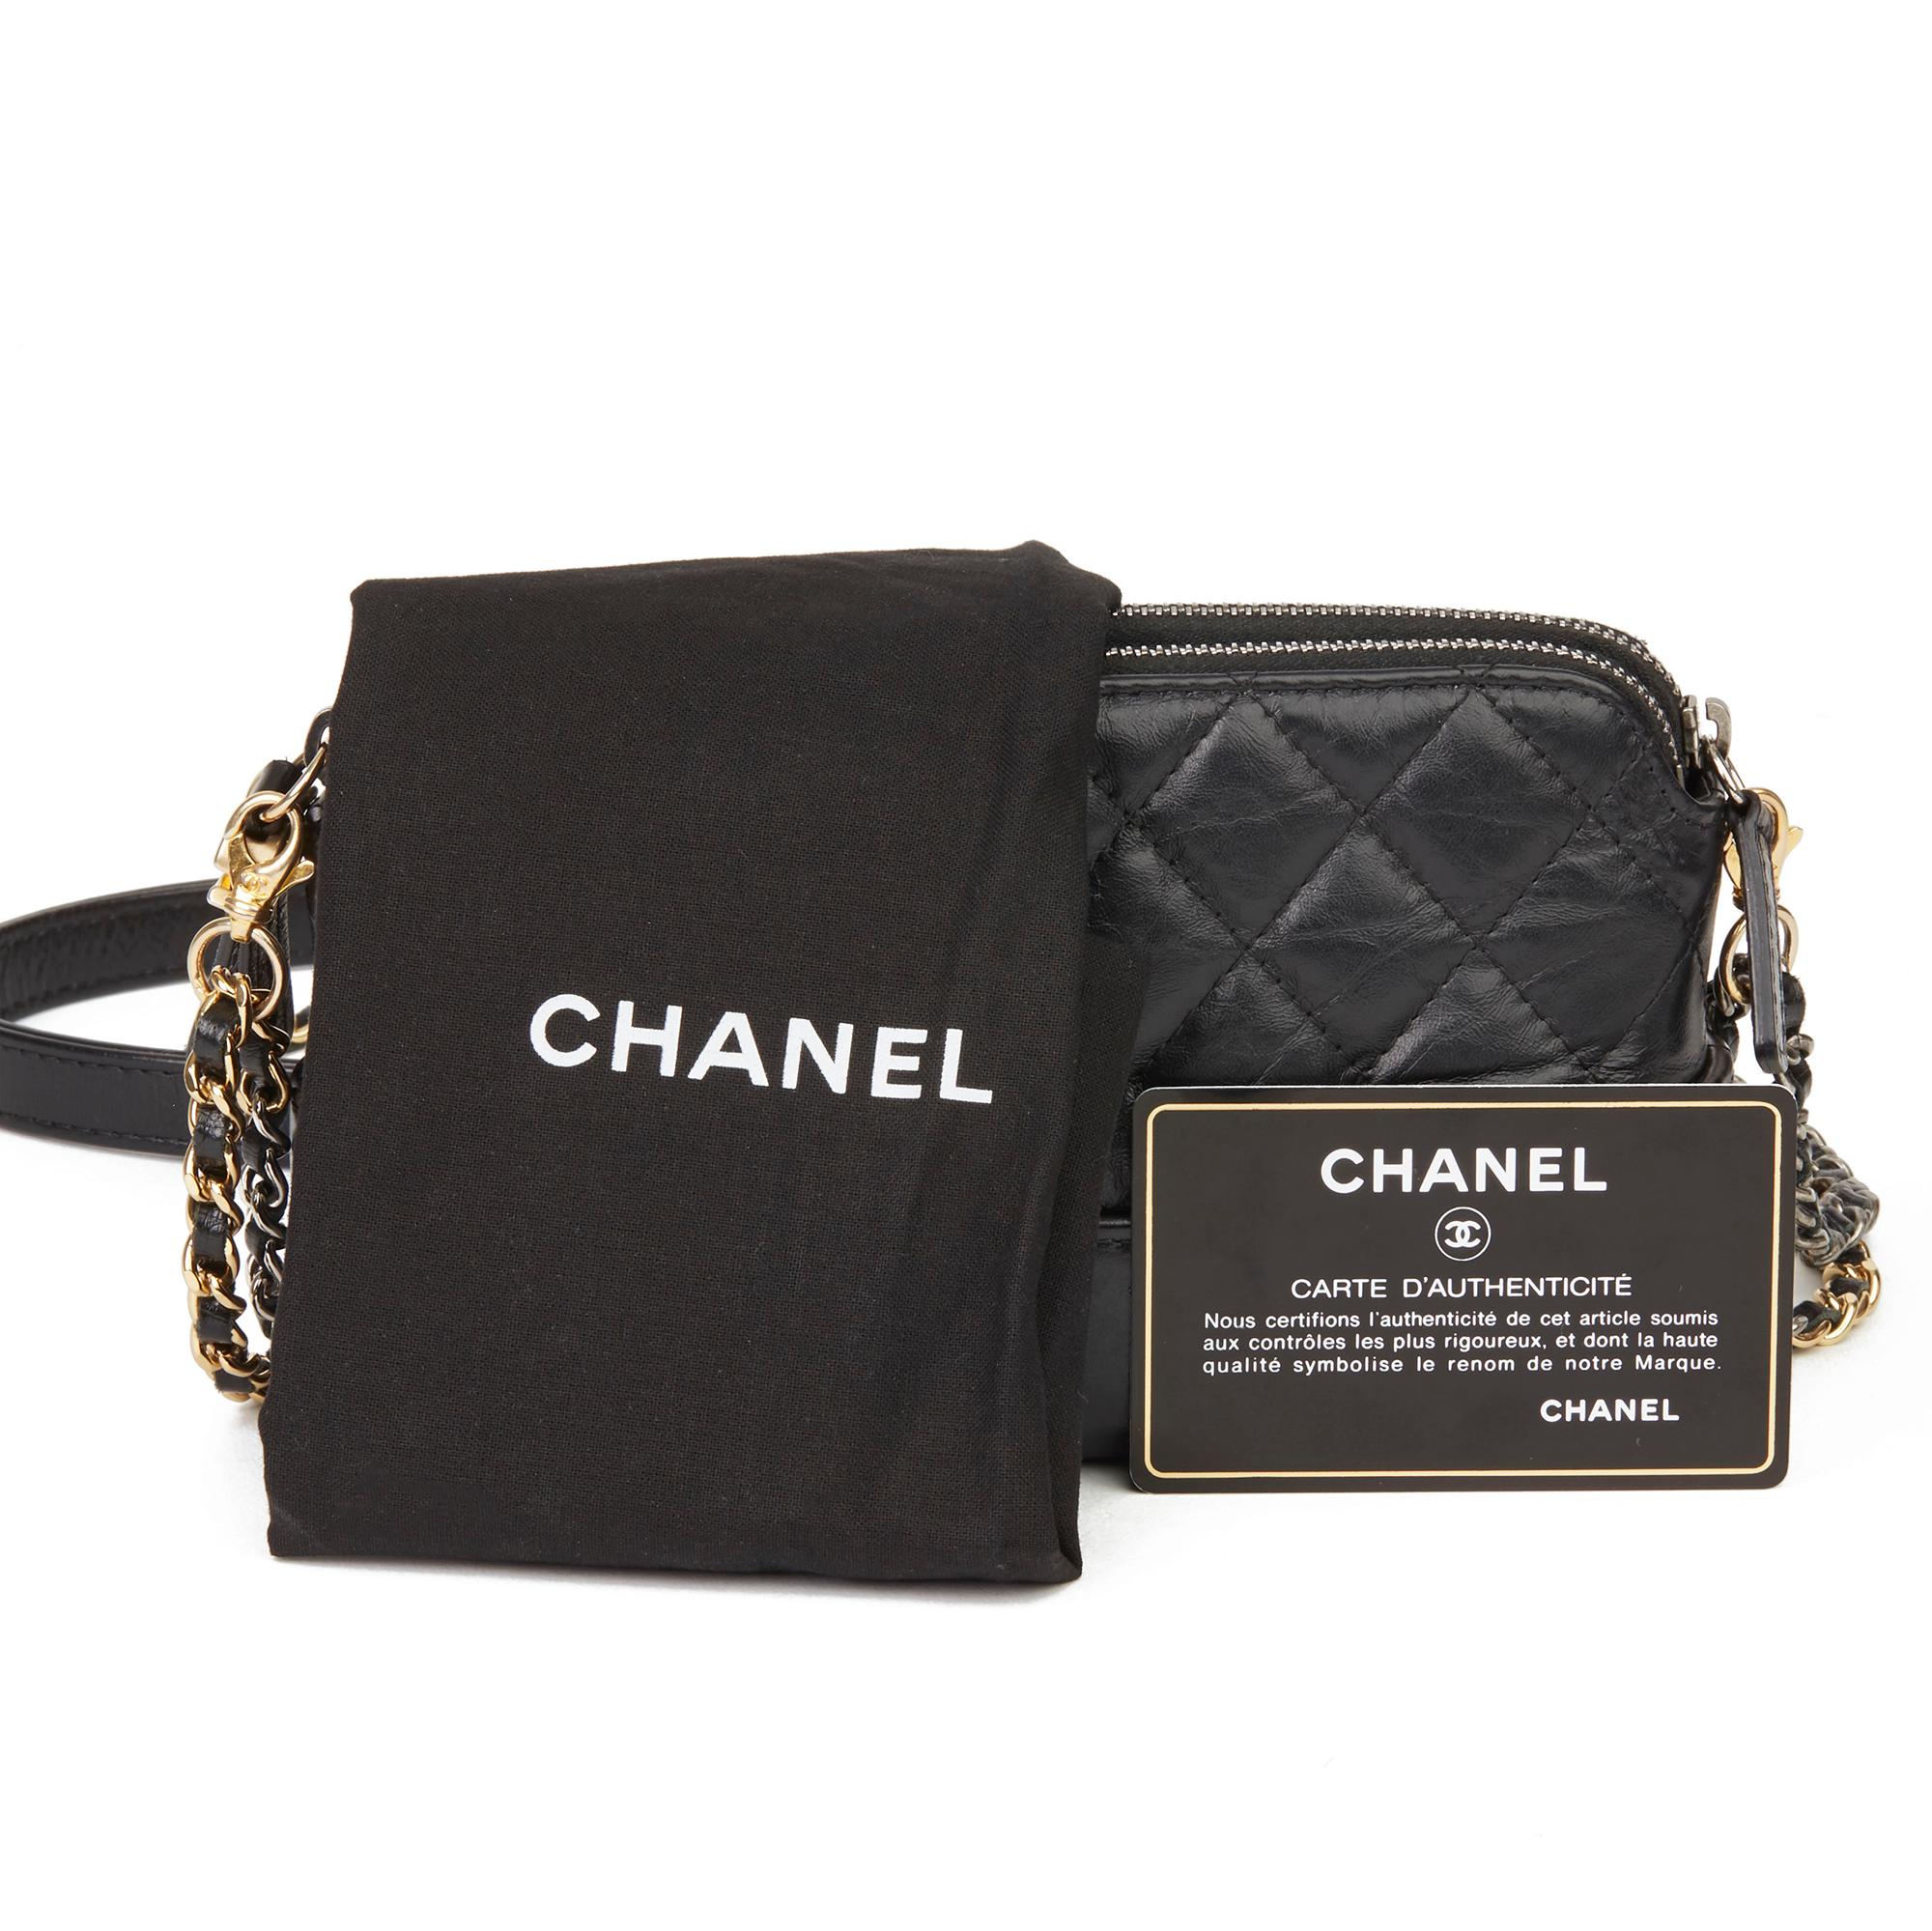 2018 Chanel Black Quilted Aged Calfskin Leather Gabrielle Clutch-with-Chain CWC 5